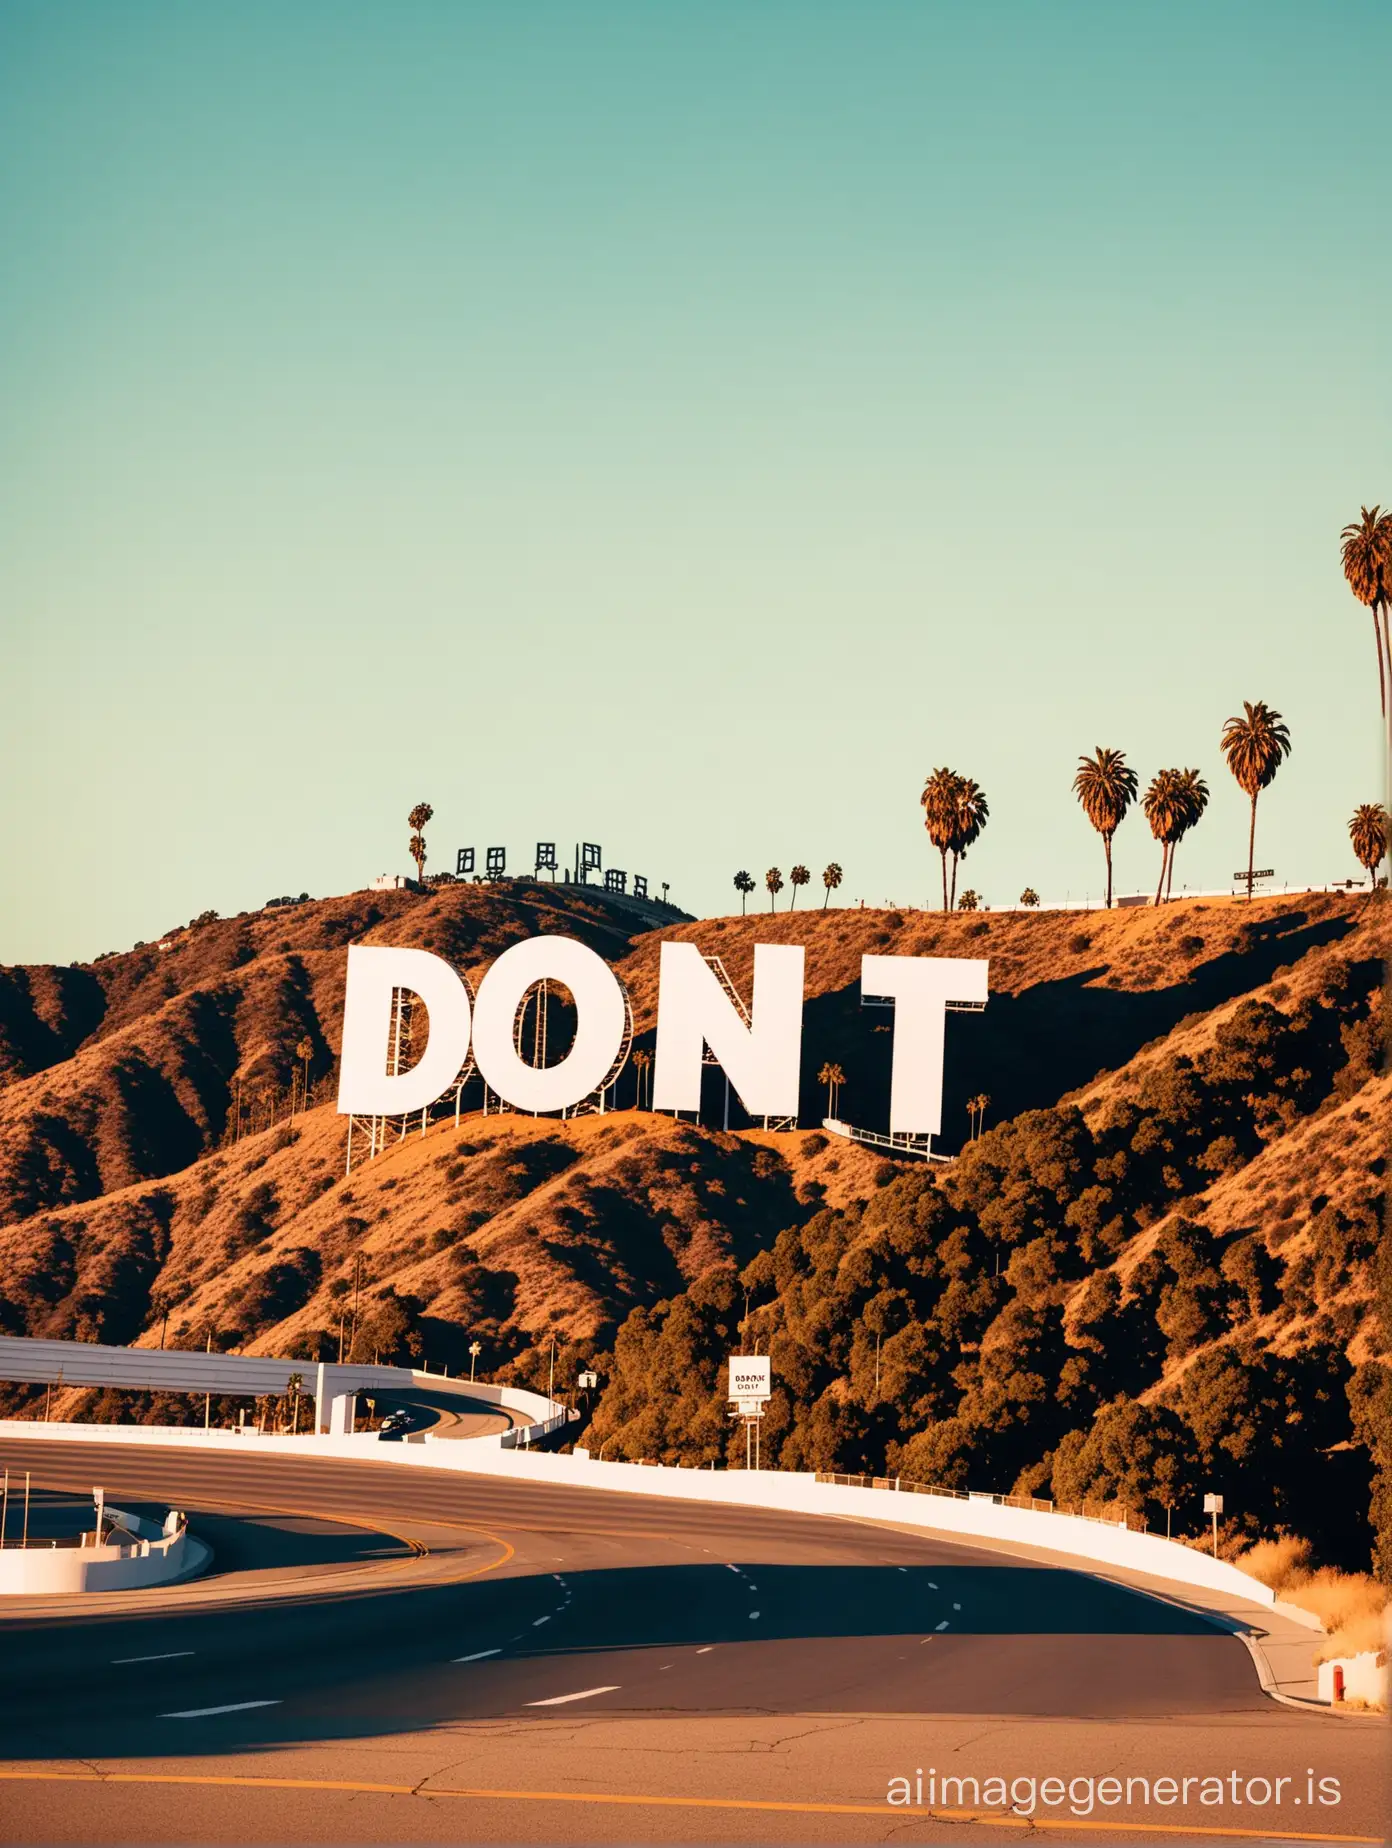 Hollywood style sign that says Don’t 